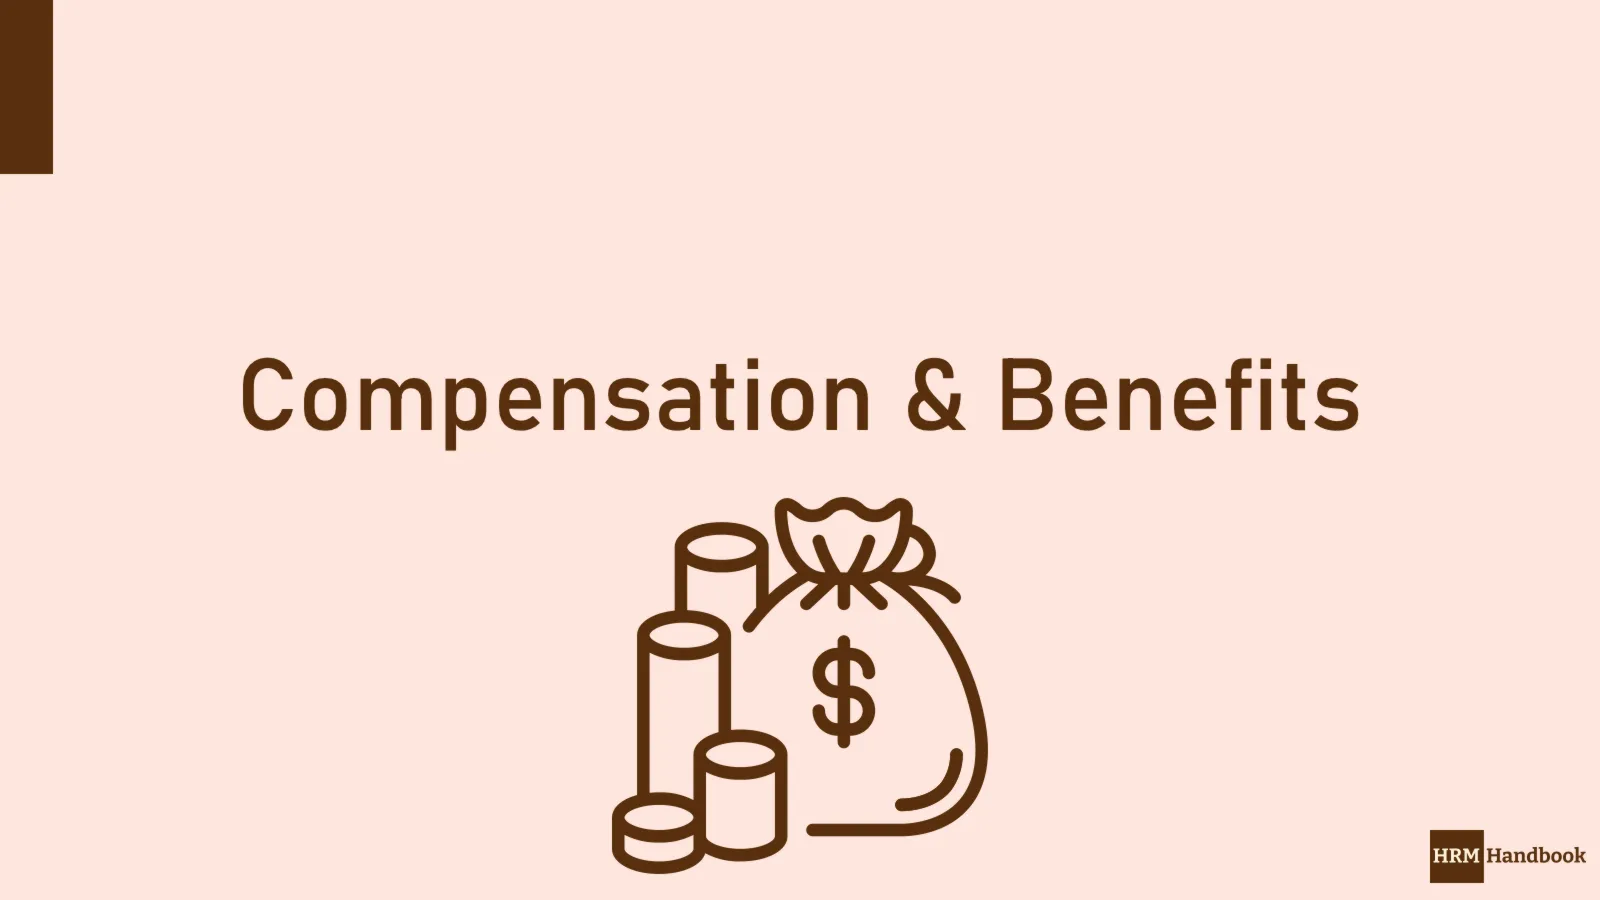 assignment on compensation and benefits